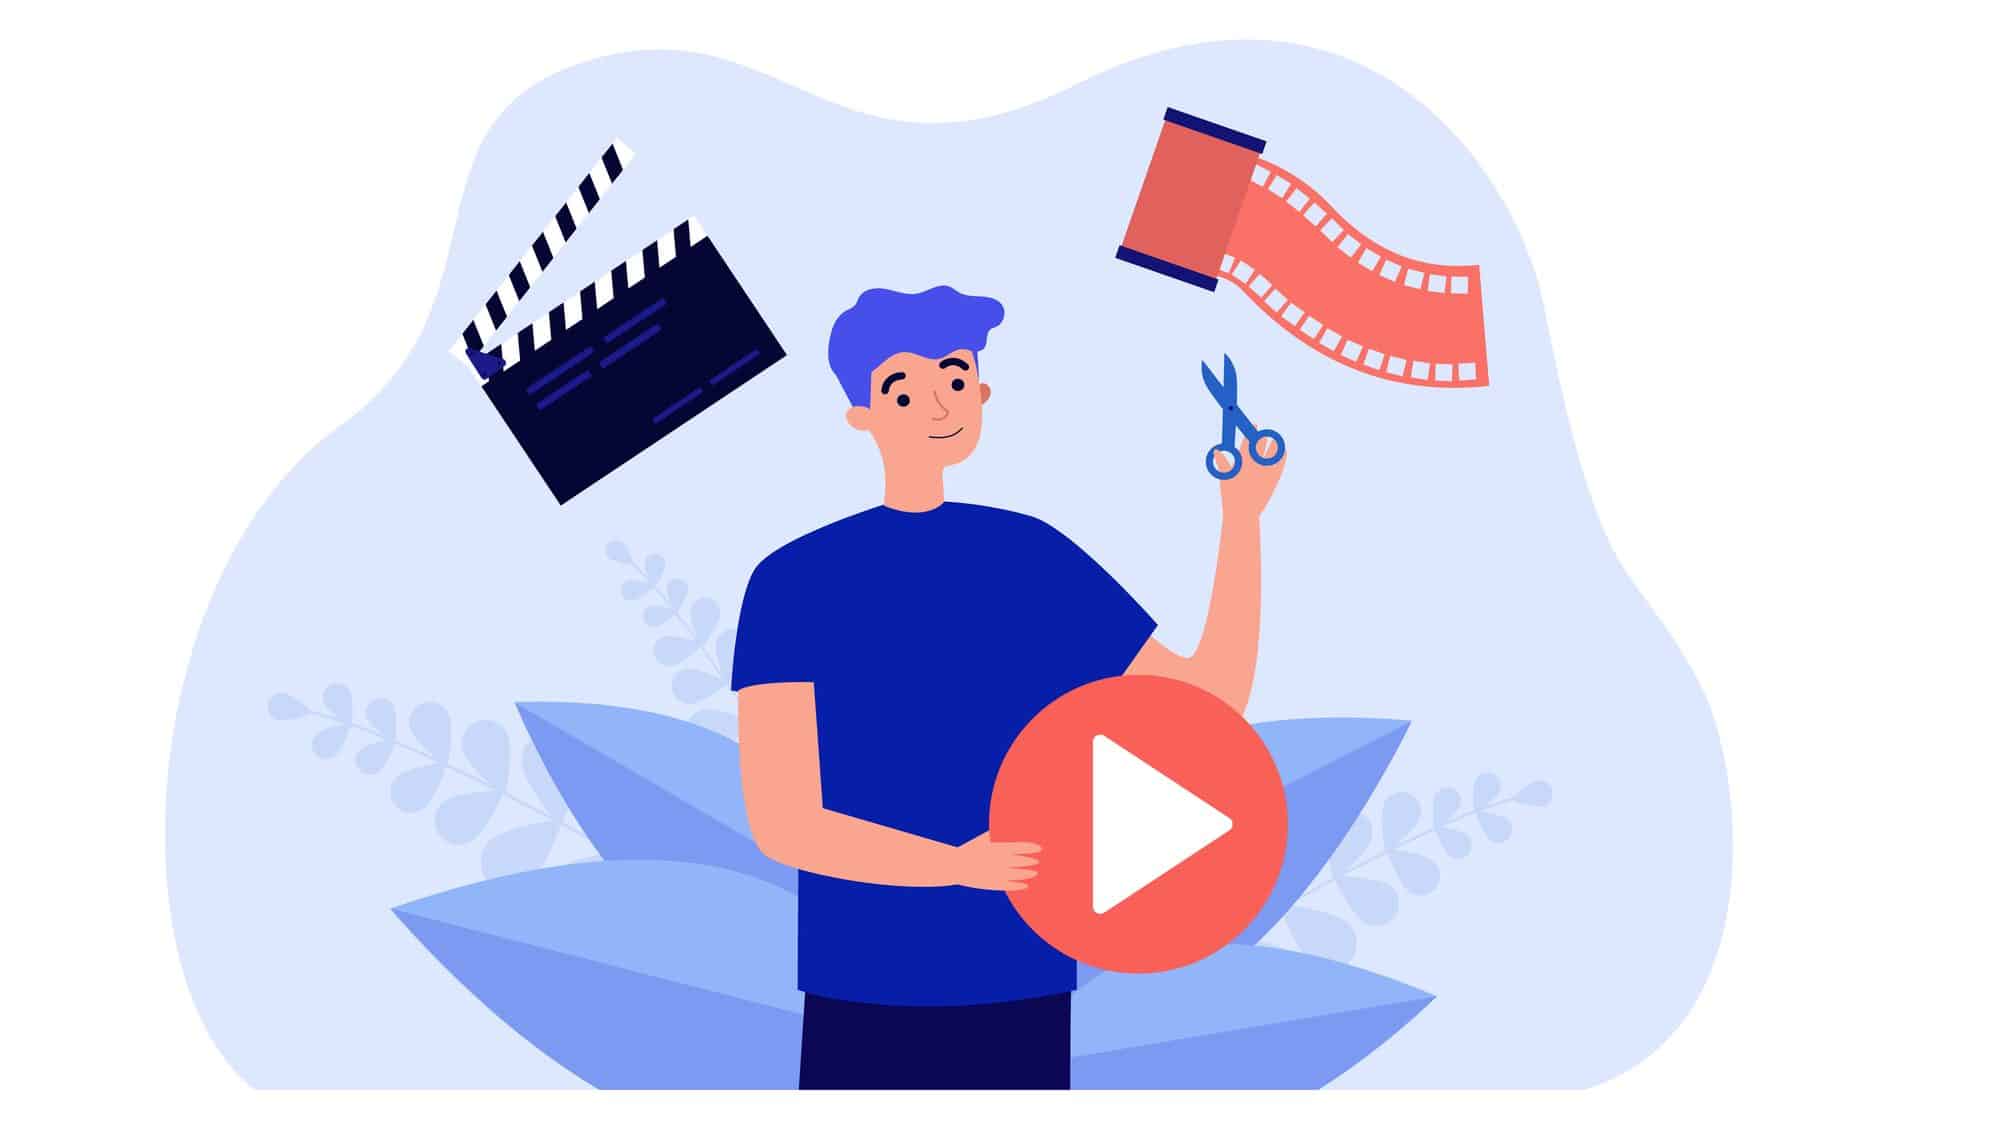 Video editing and movie digital production by people. Man holding scissors, creating digital content flat vector illustration. Software editor concept for banner, website design or landing web page